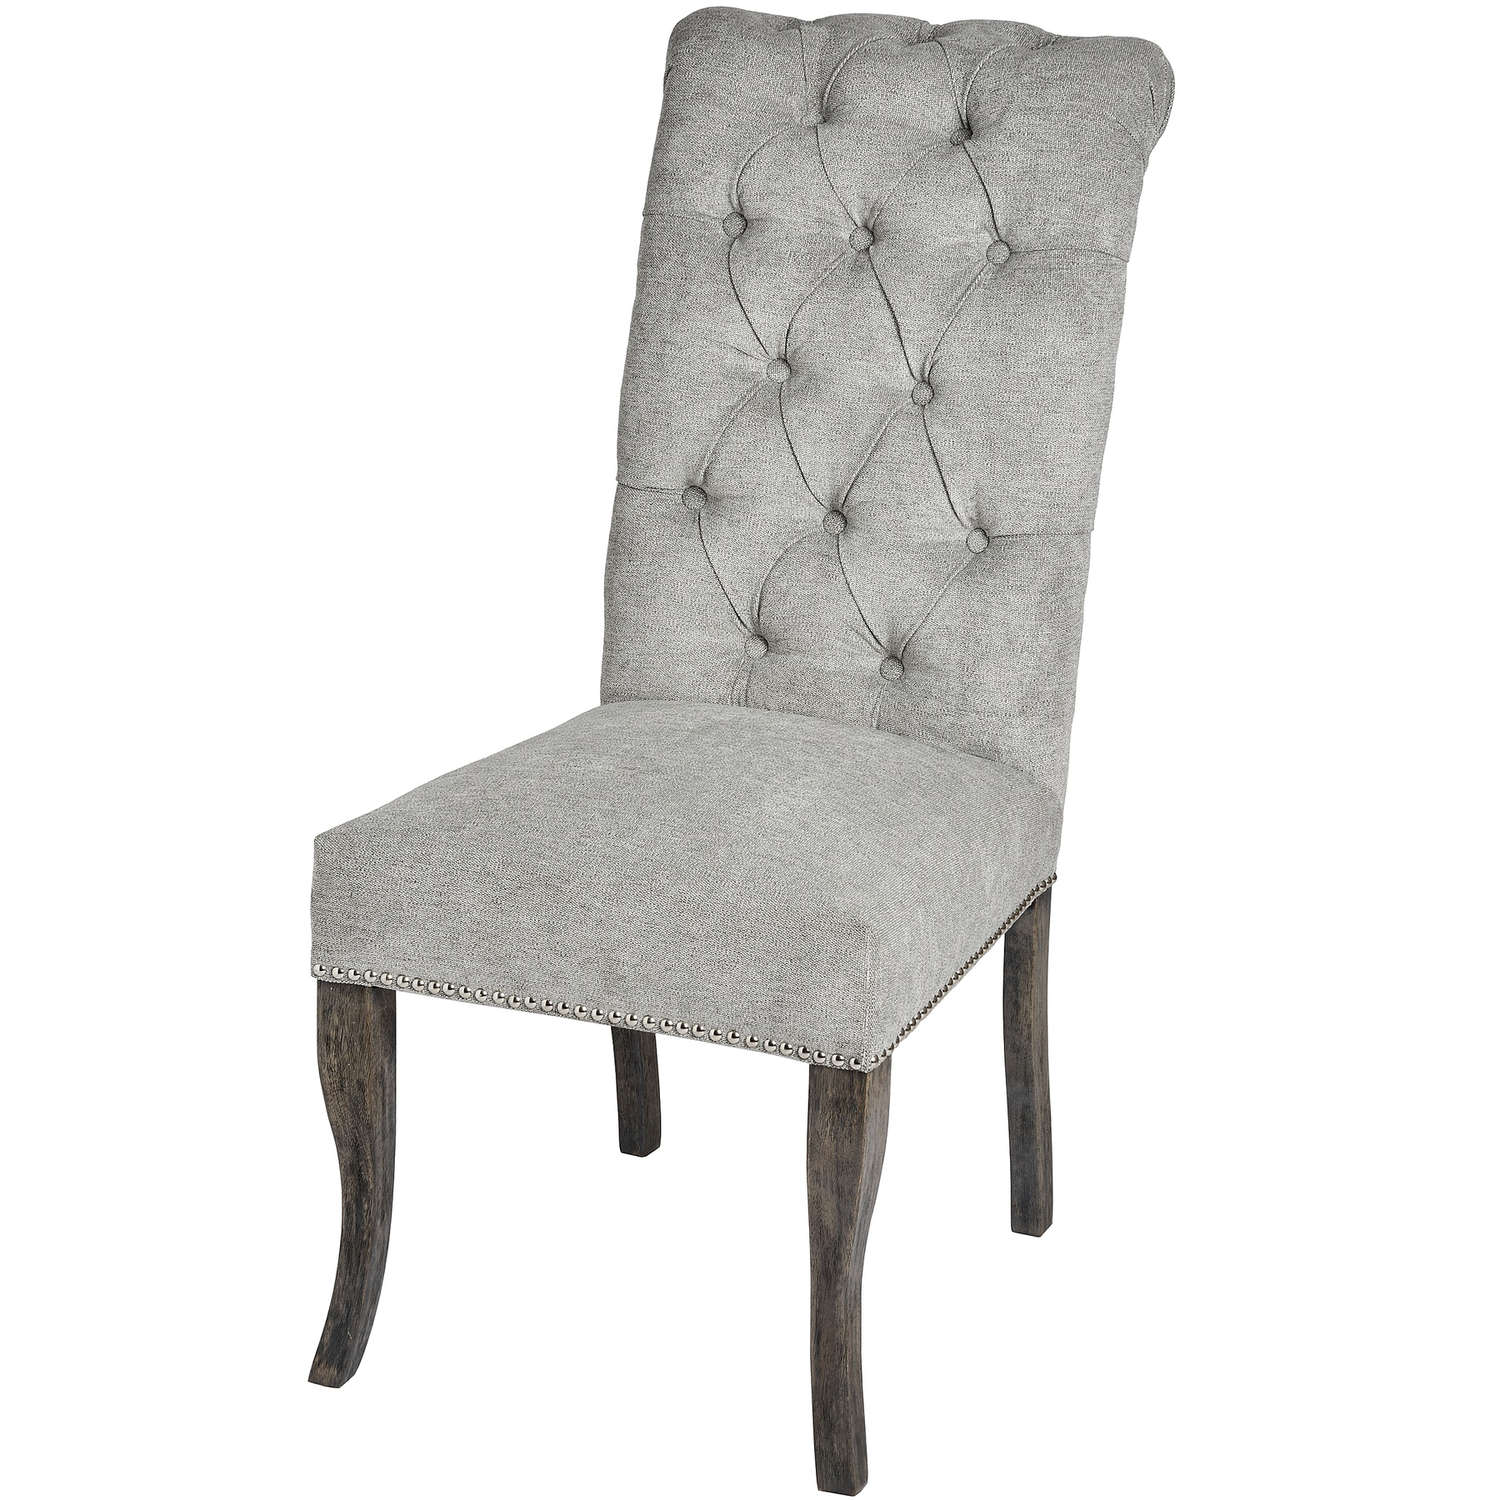 View Silver Roll Top Dining Chair With Ring Pull information